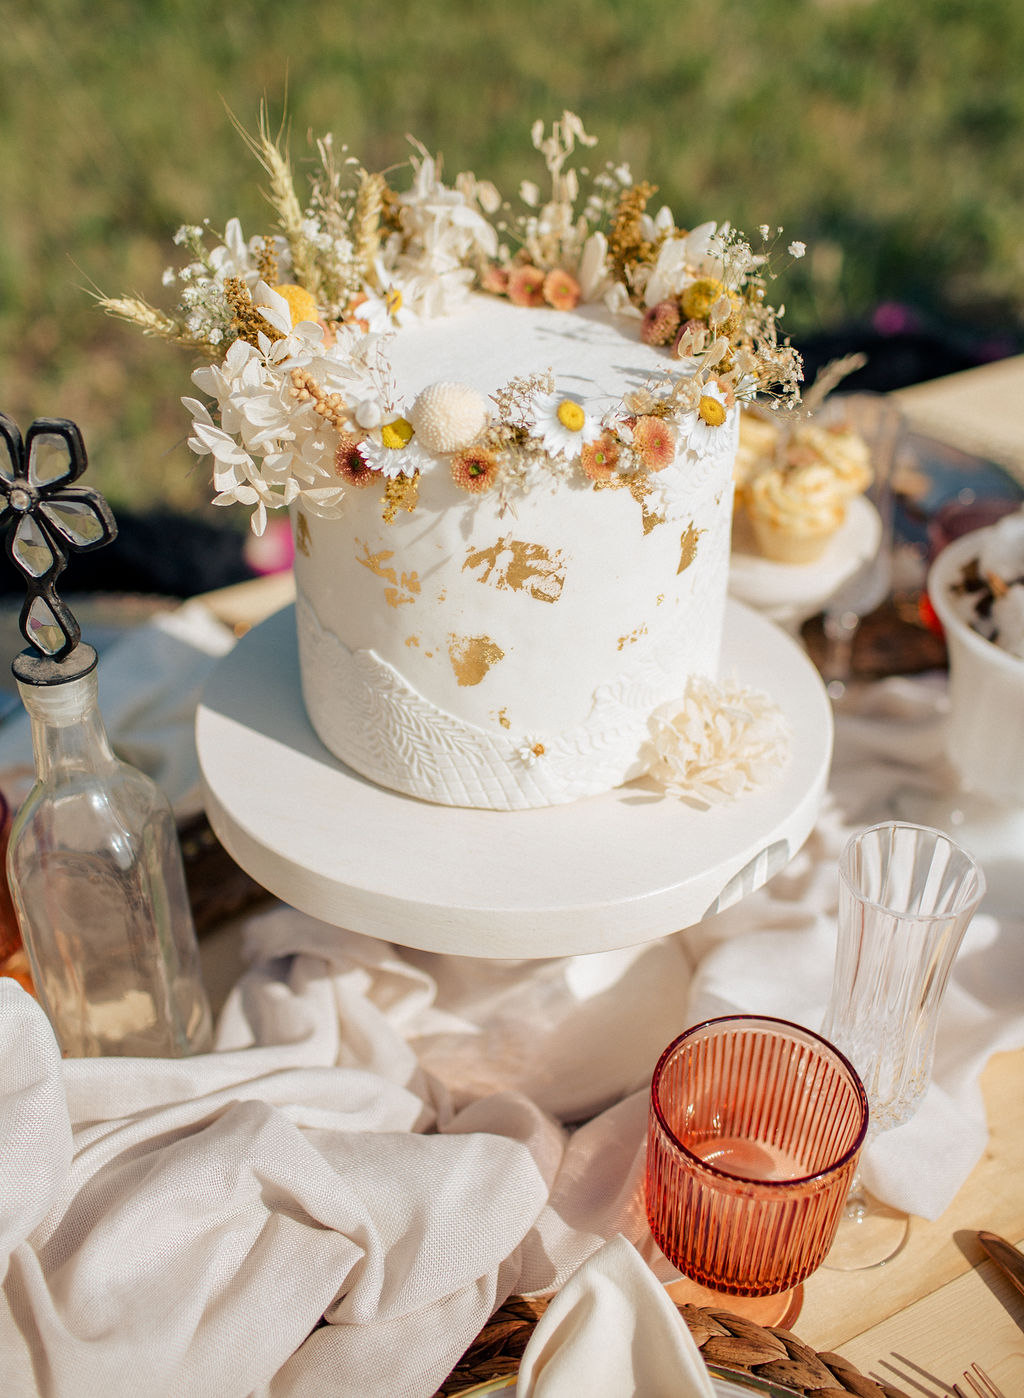 Wedding cake adorned with wildflower crown